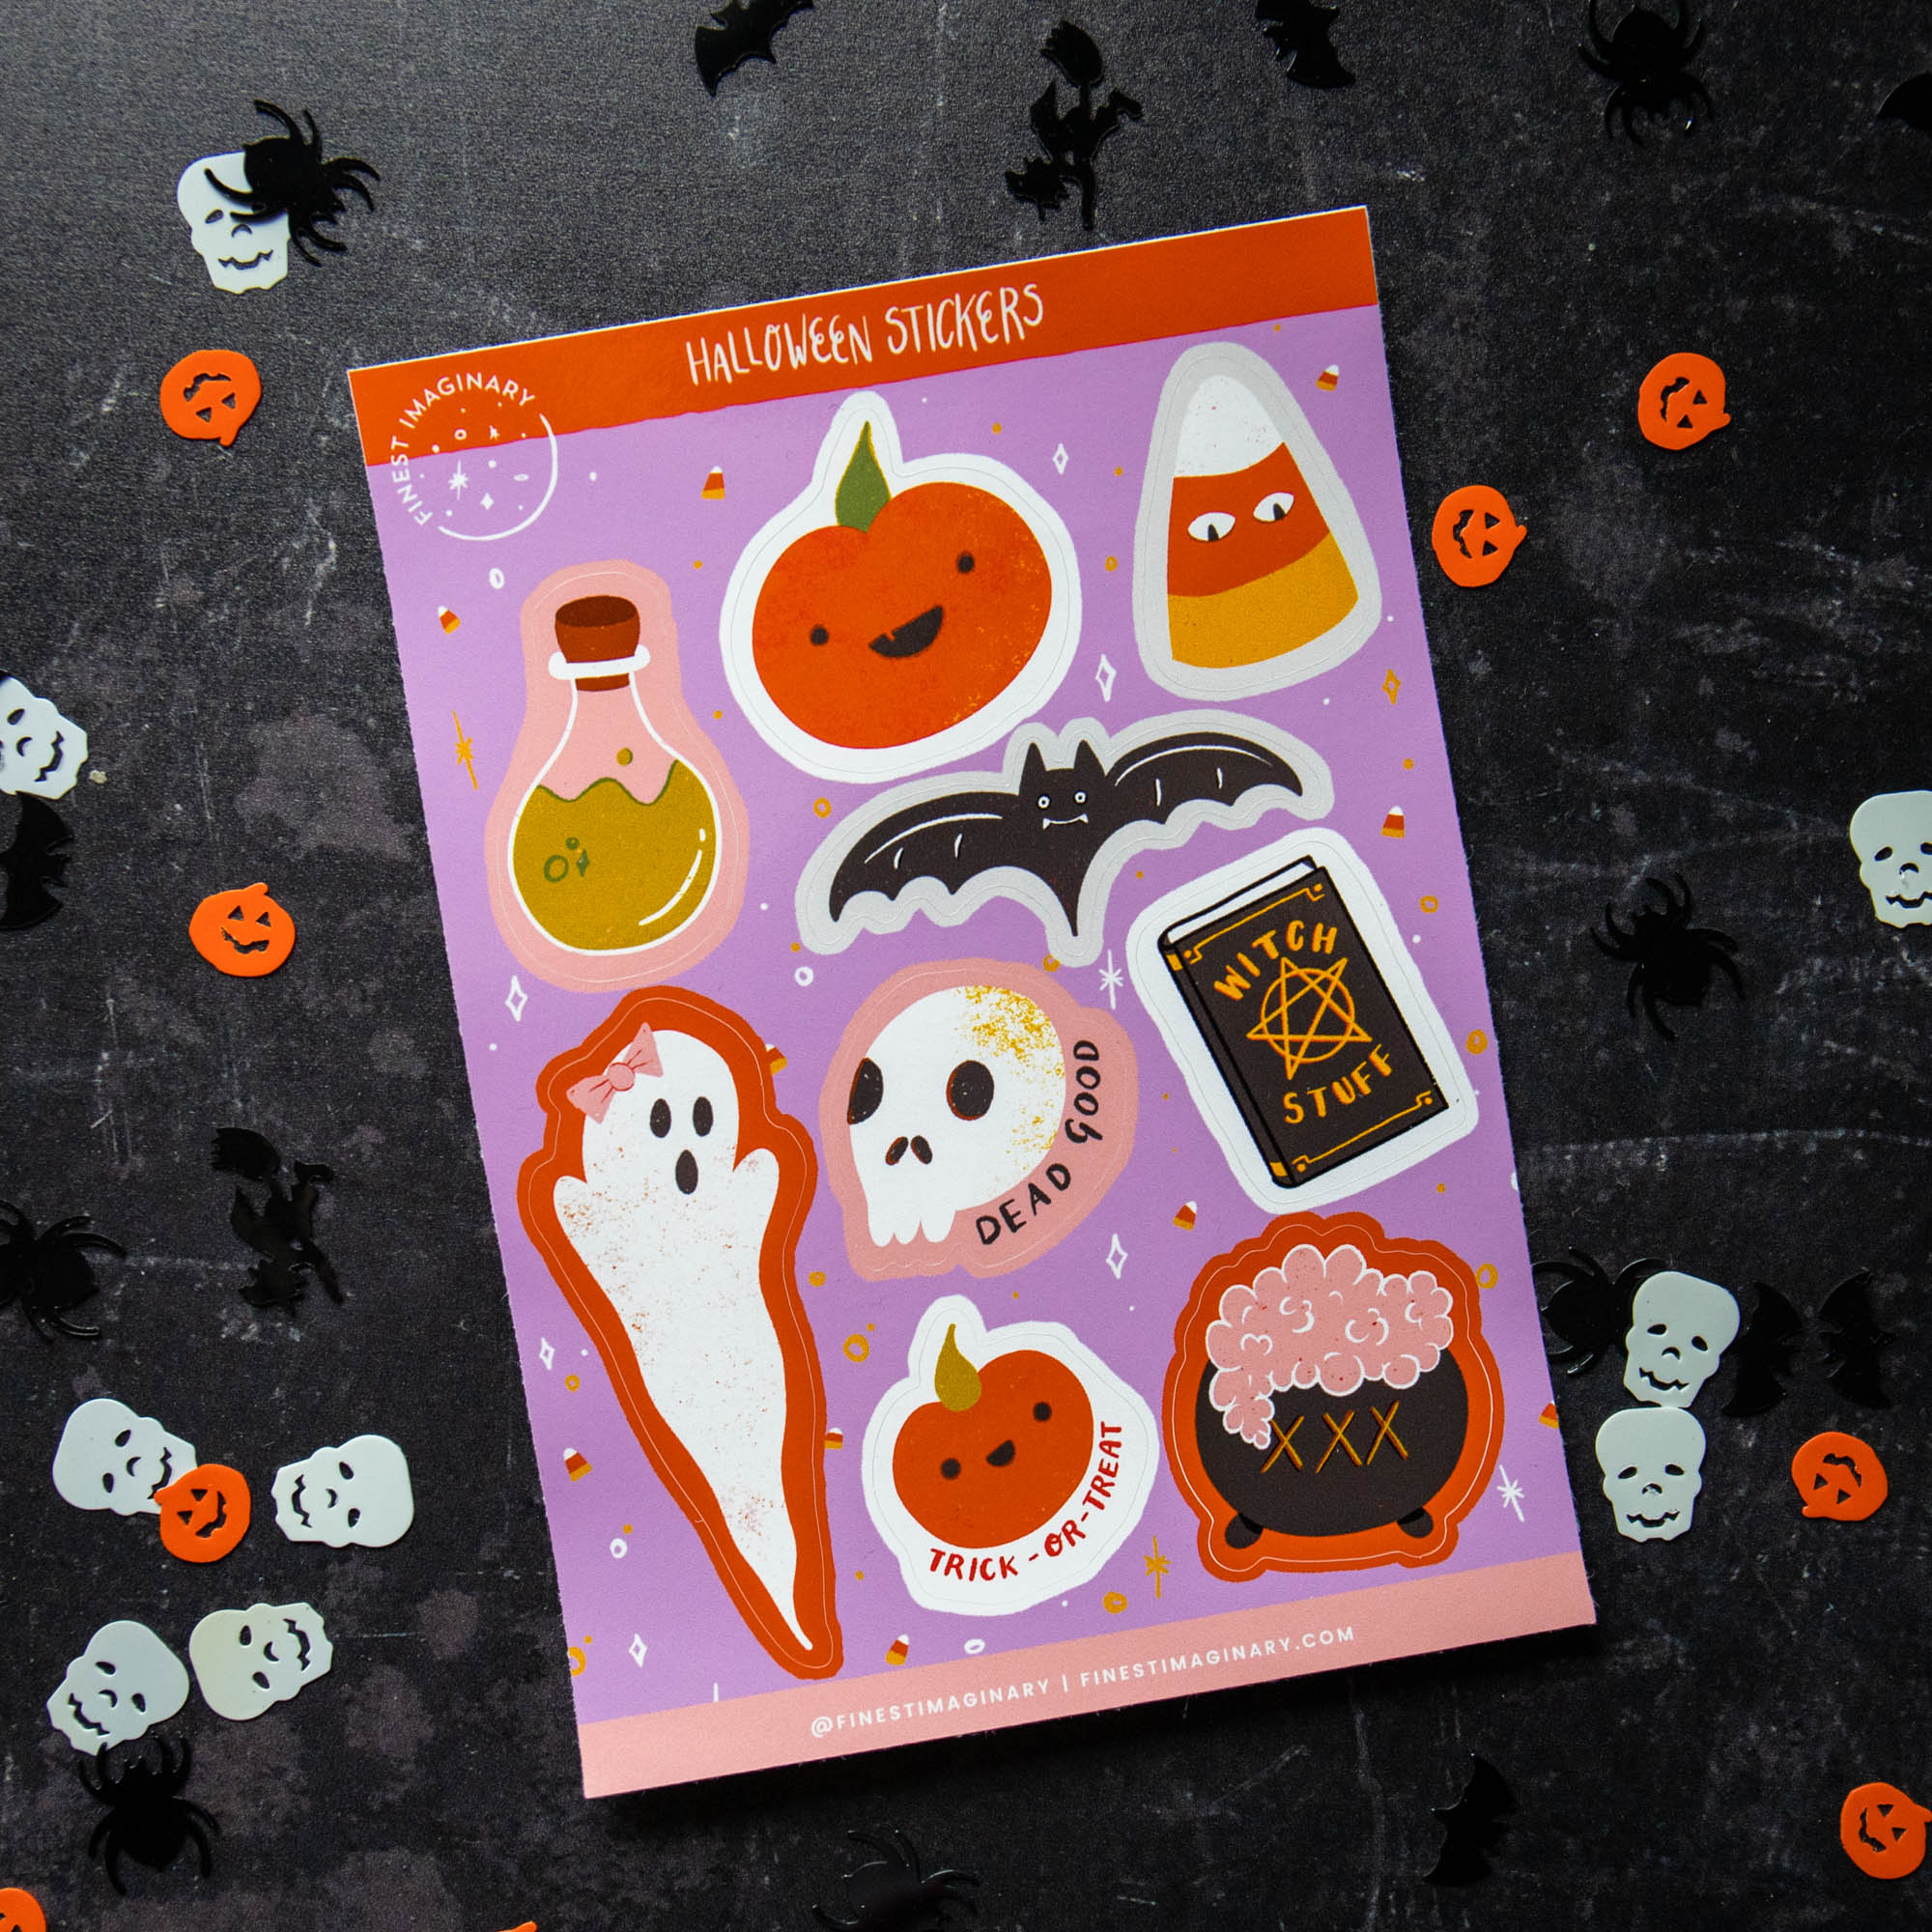 Spookify Your World: Halloween Stickers and Washi Tape Unleashed!